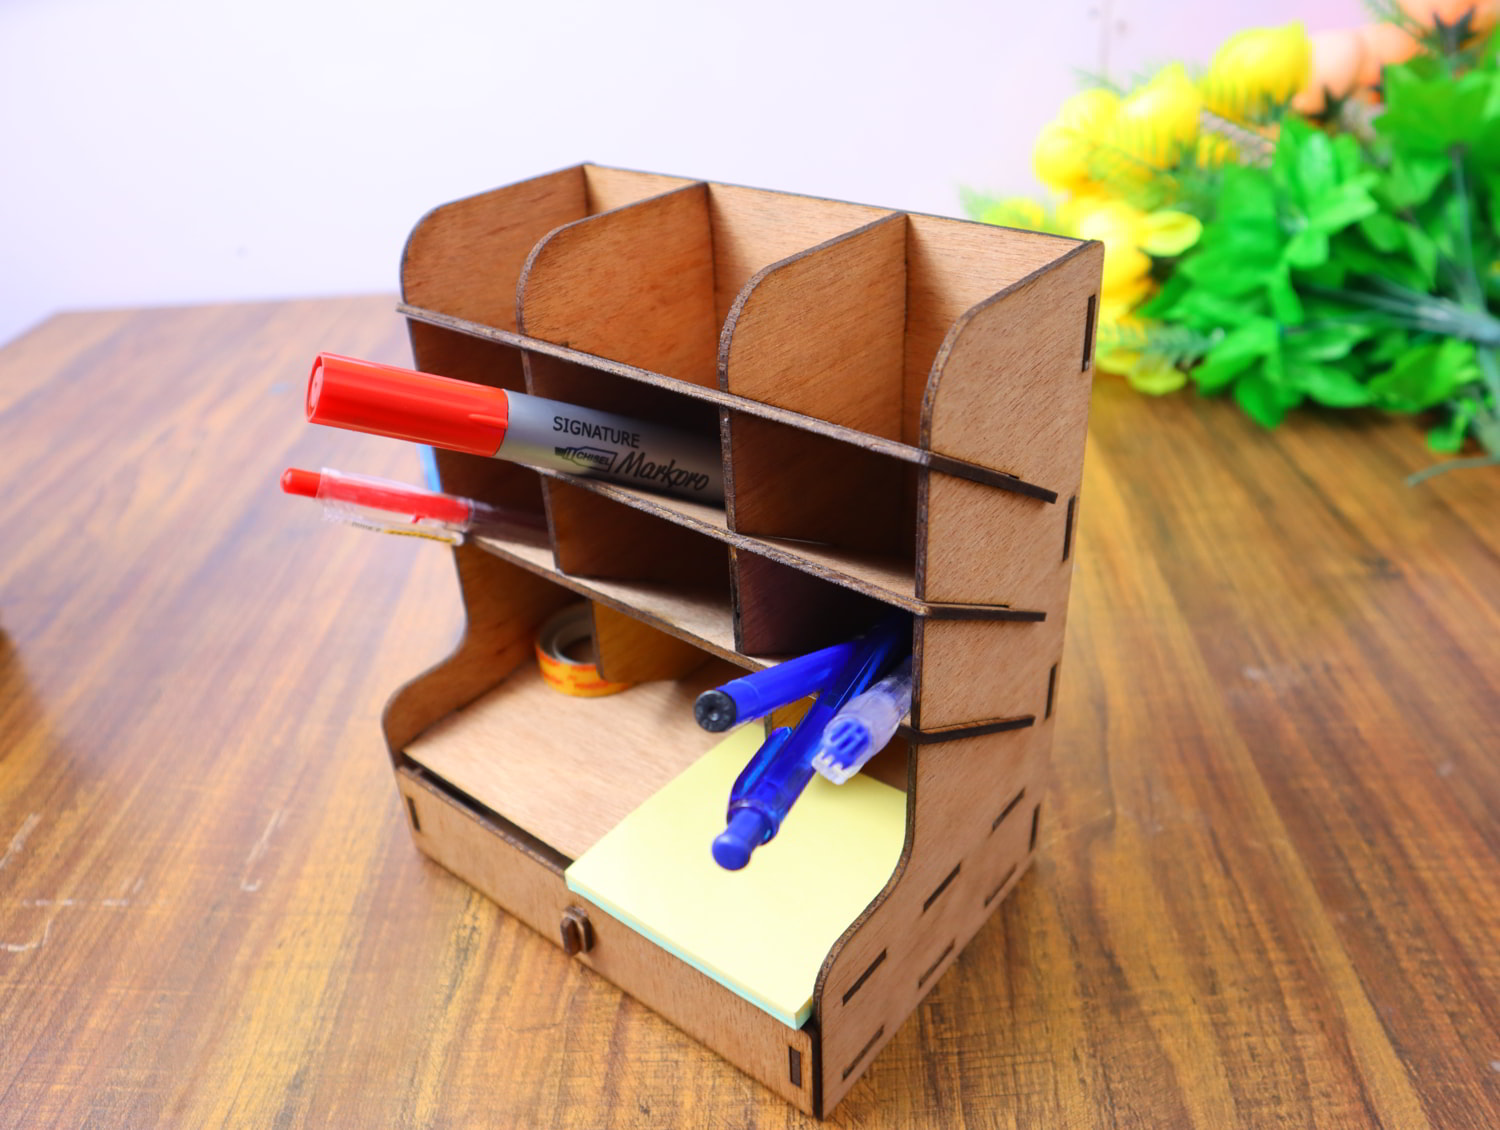 Laser Cut Wood Desk Organizer With Drawers Office Supplies Holder 3mm Free Vector